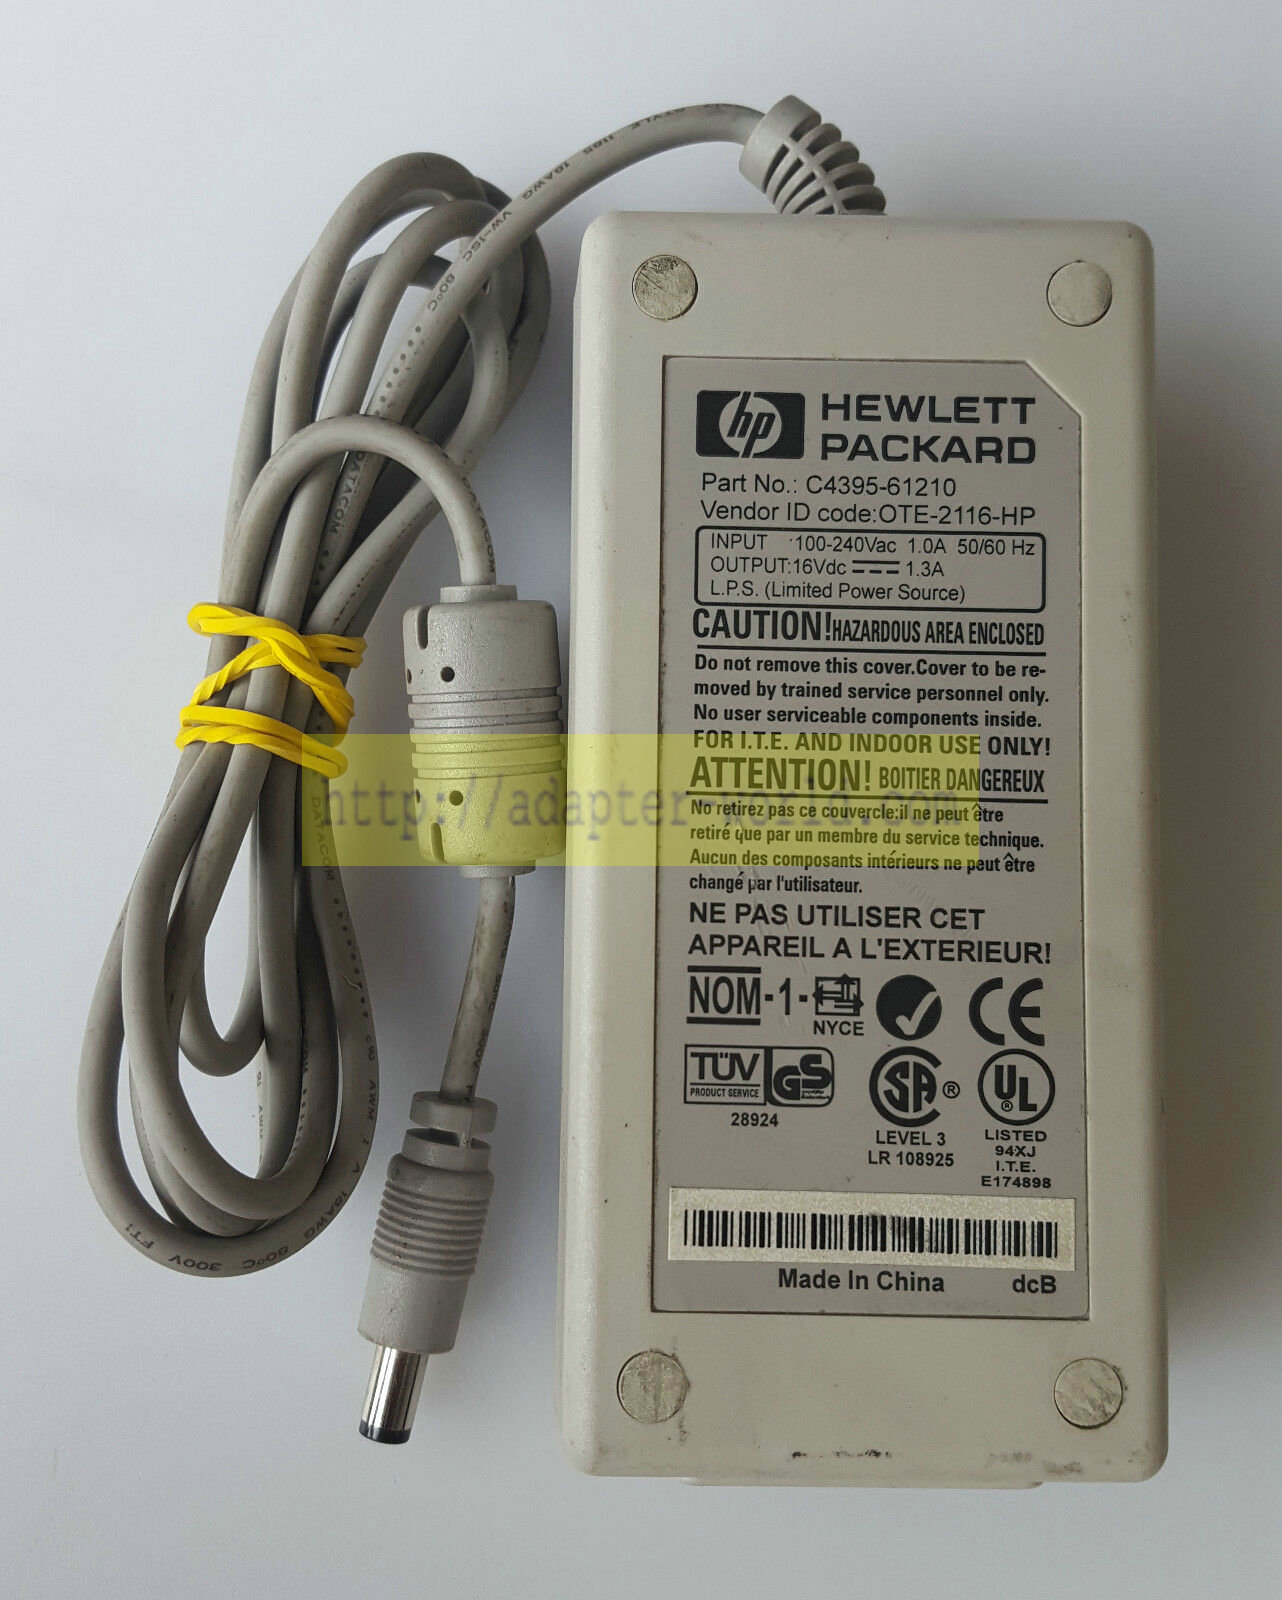 *Brand NEW* OTE-2116-HP HP HEWLETT PACKARD C4395-61210 16V 1.3A AC/DC ADAPTER POWER SUPPLY - Click Image to Close